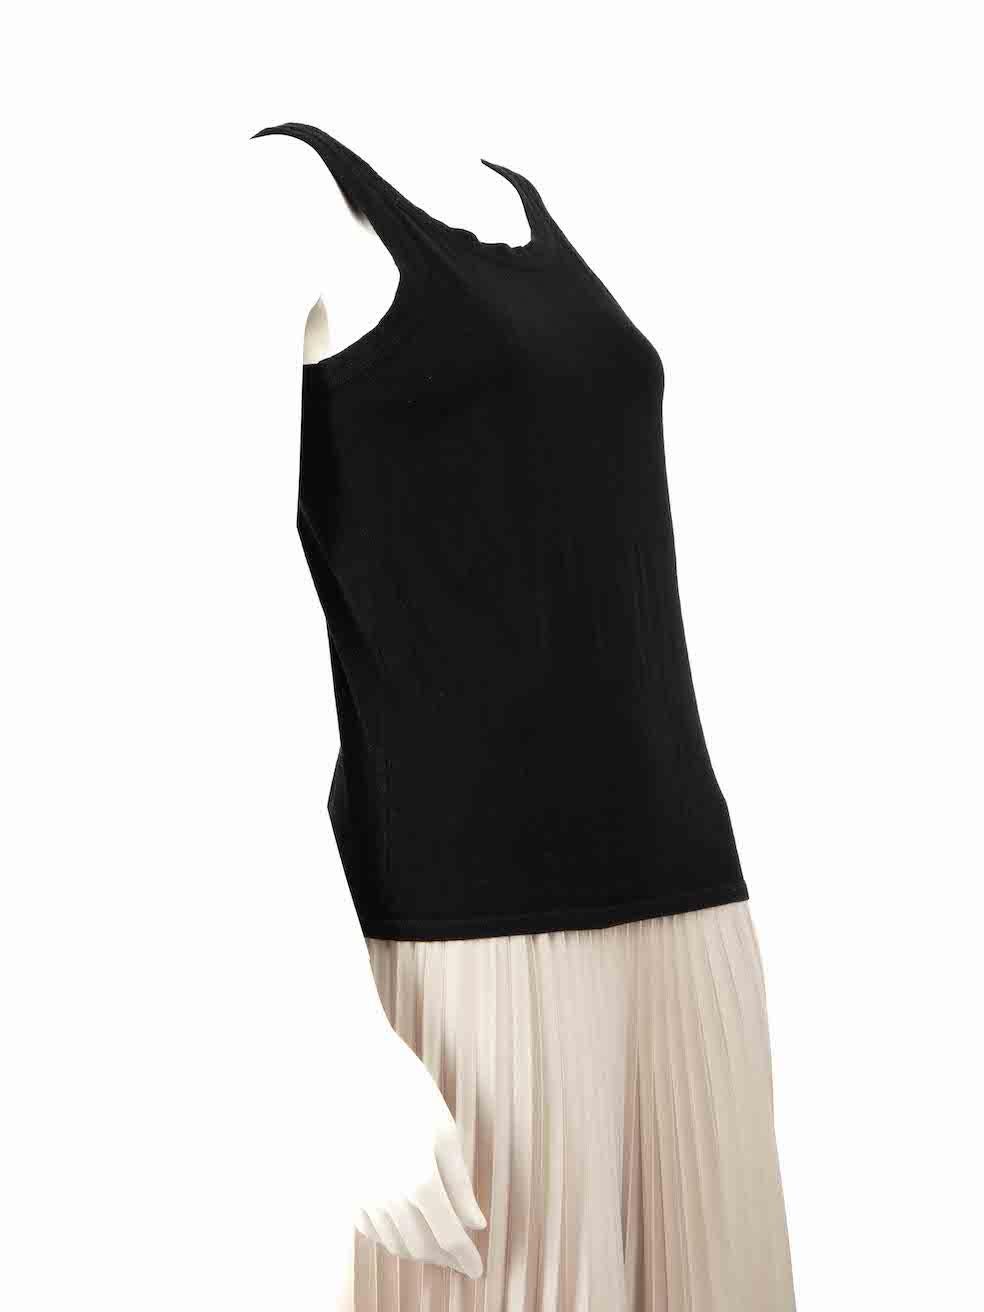 CONDITION is Very good. Hardly any wear to tank top is evident on this used The Row designer resale item.
 
 
 
 Details
 
 
 Black
 
 Cotton
 
 Tank top
 
 Round neckline
 
 Stretchy
 
 Sleeveless
 
 
 
 
 
 Made in USA
 
 
 
 Composition
 
 95%